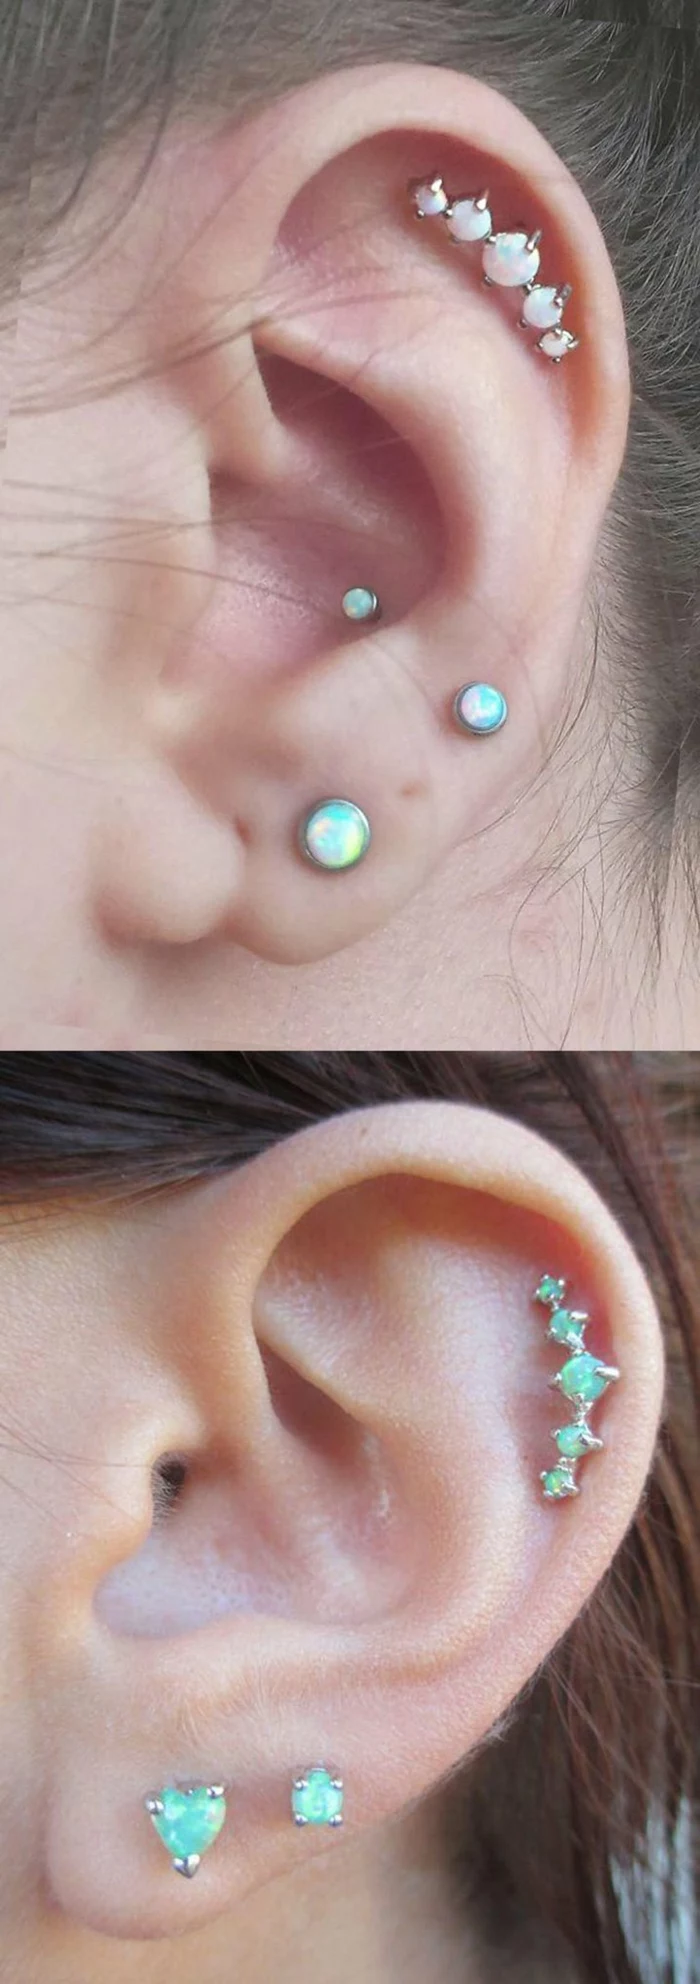 two close up photos of ears, wearing multiple different earrings with blue rhinestones, how much is a cartilage piercing